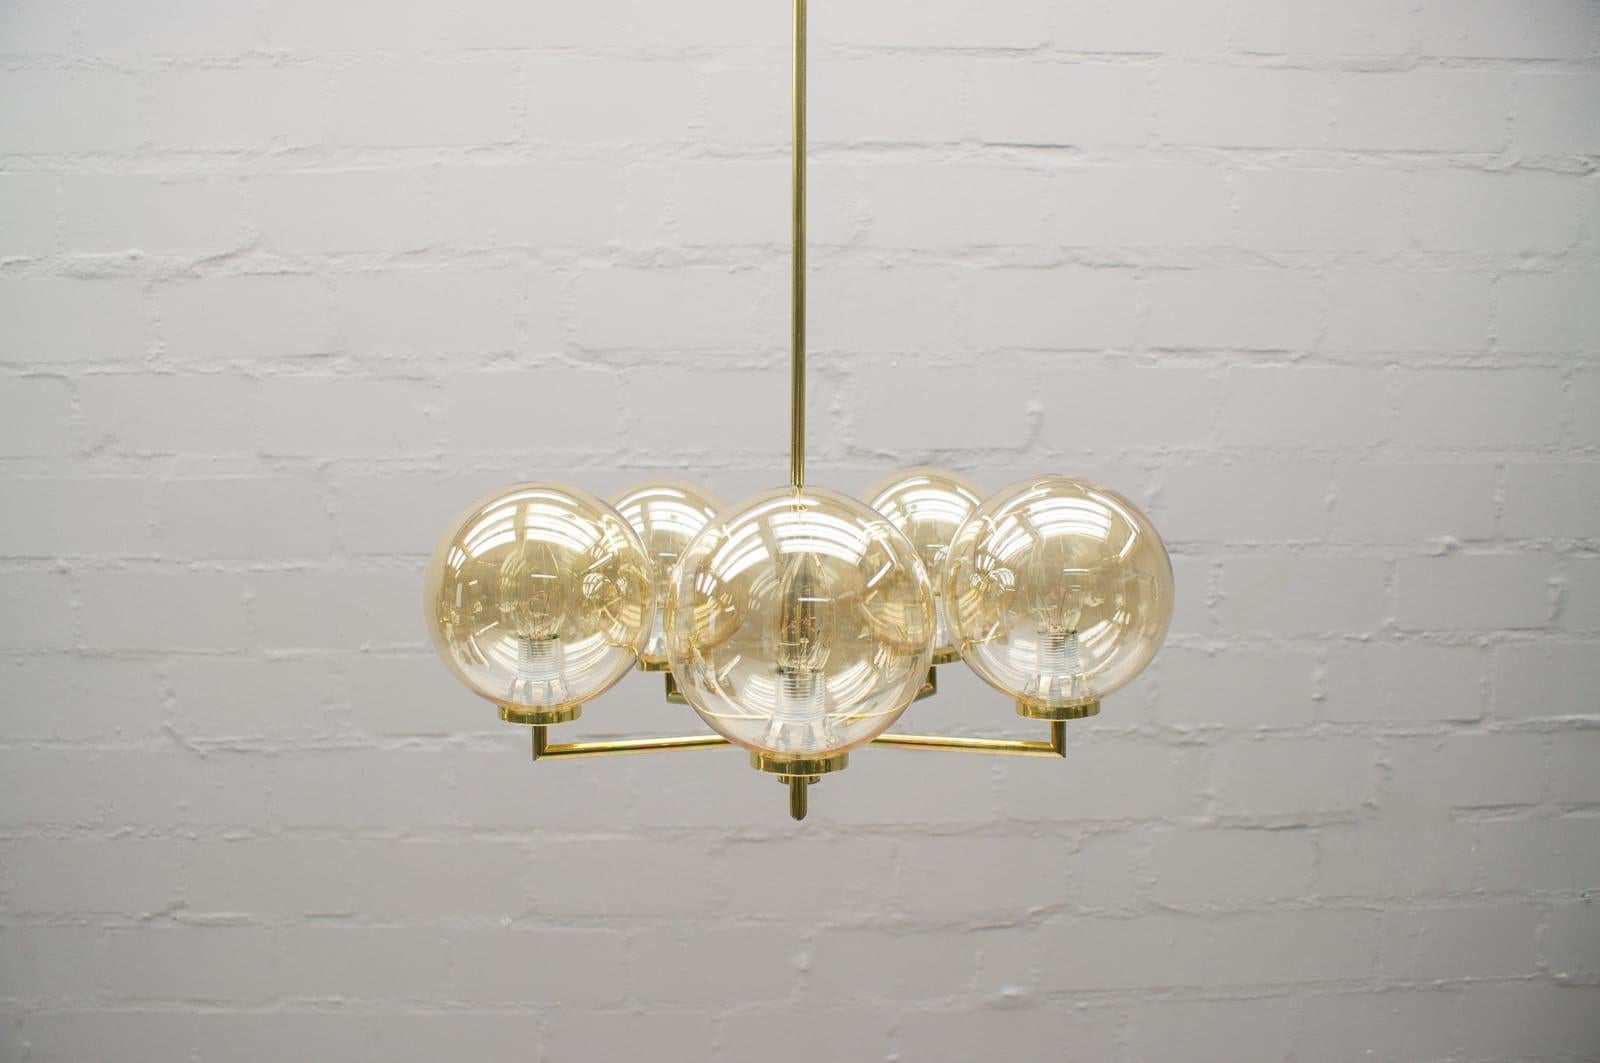 Space Age Orbit Ceiling Lamp with Five Amber Glass Balls, 1960s In Good Condition For Sale In Nürnberg, Bayern